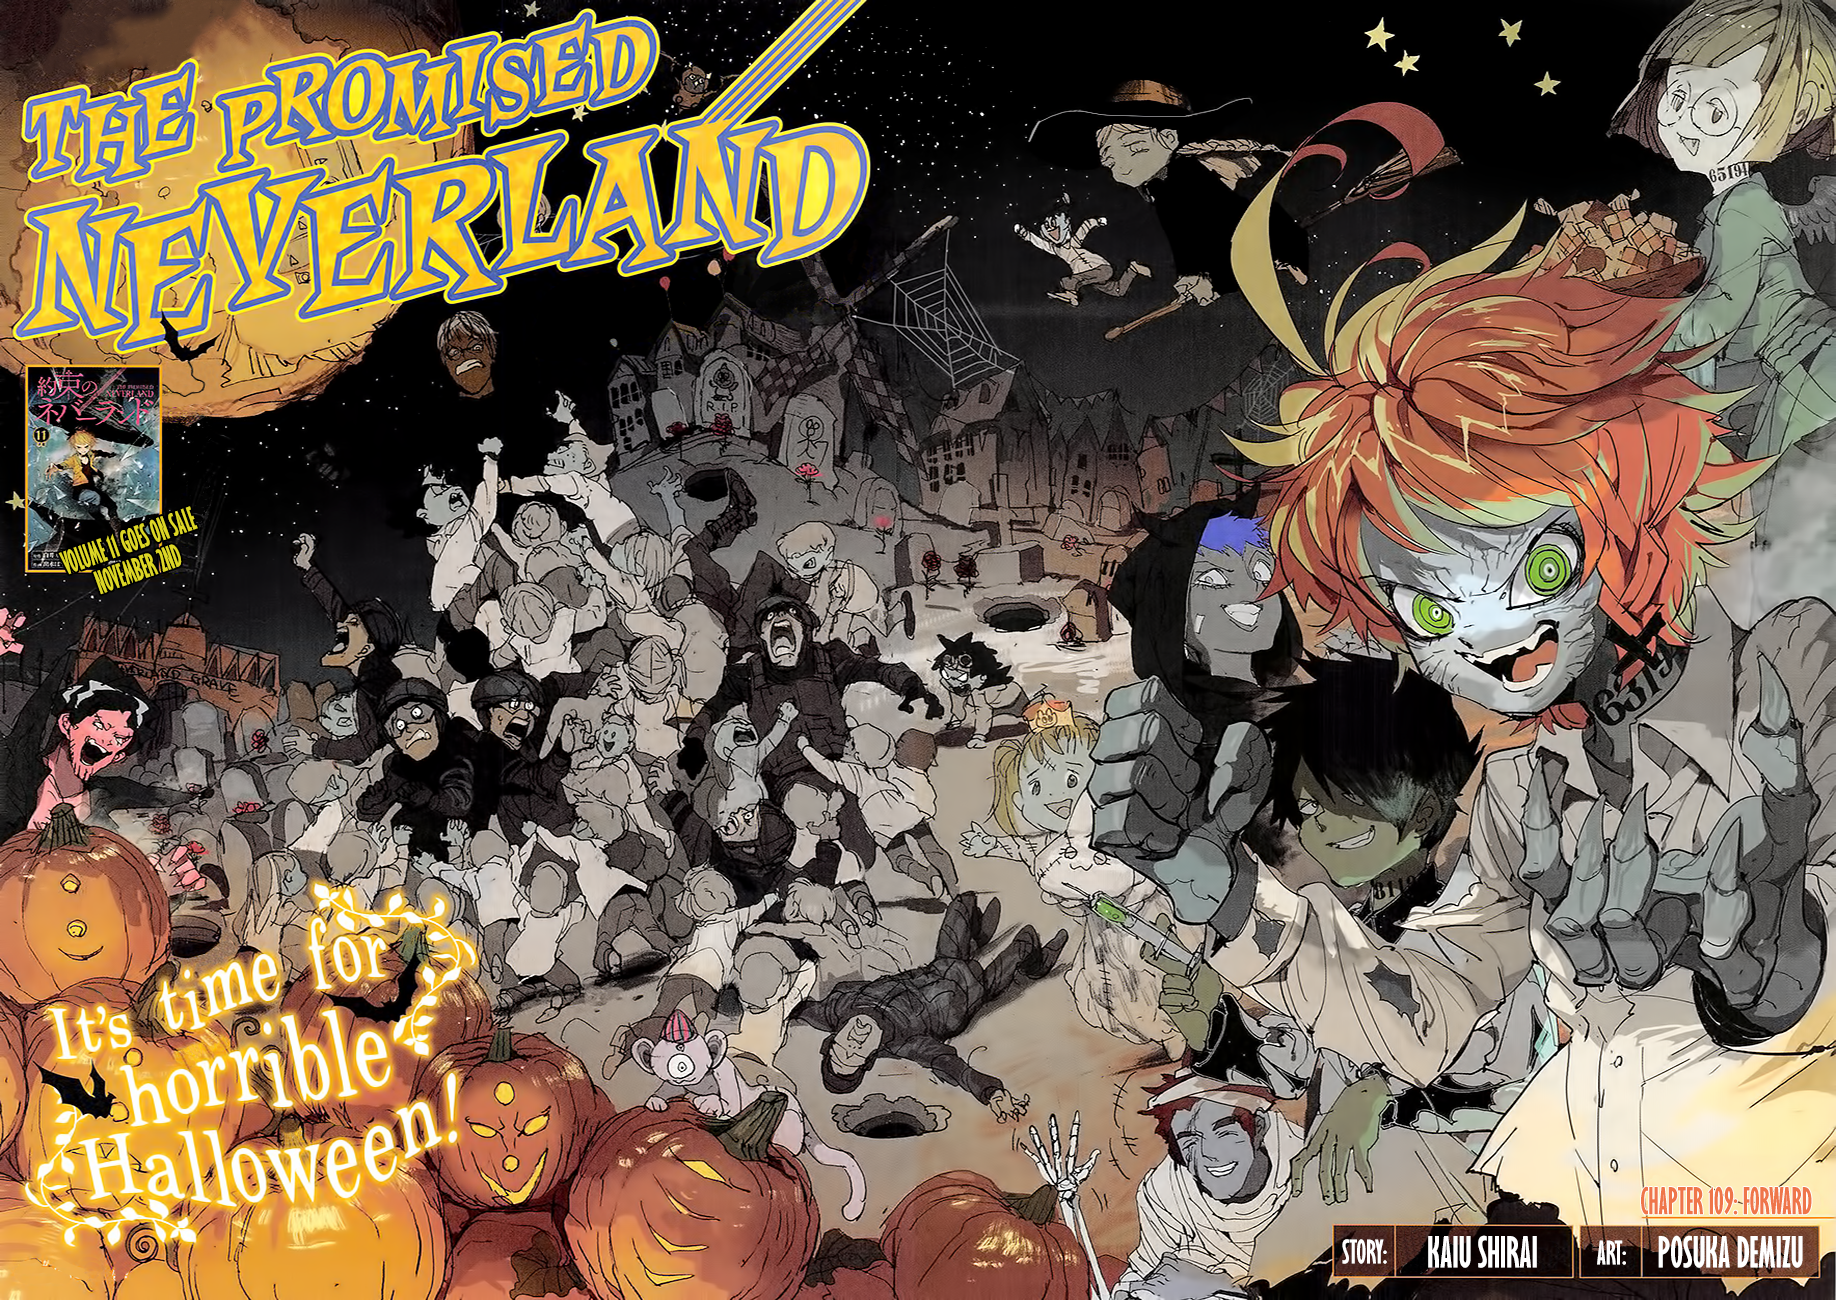 The Promised Neverland 109